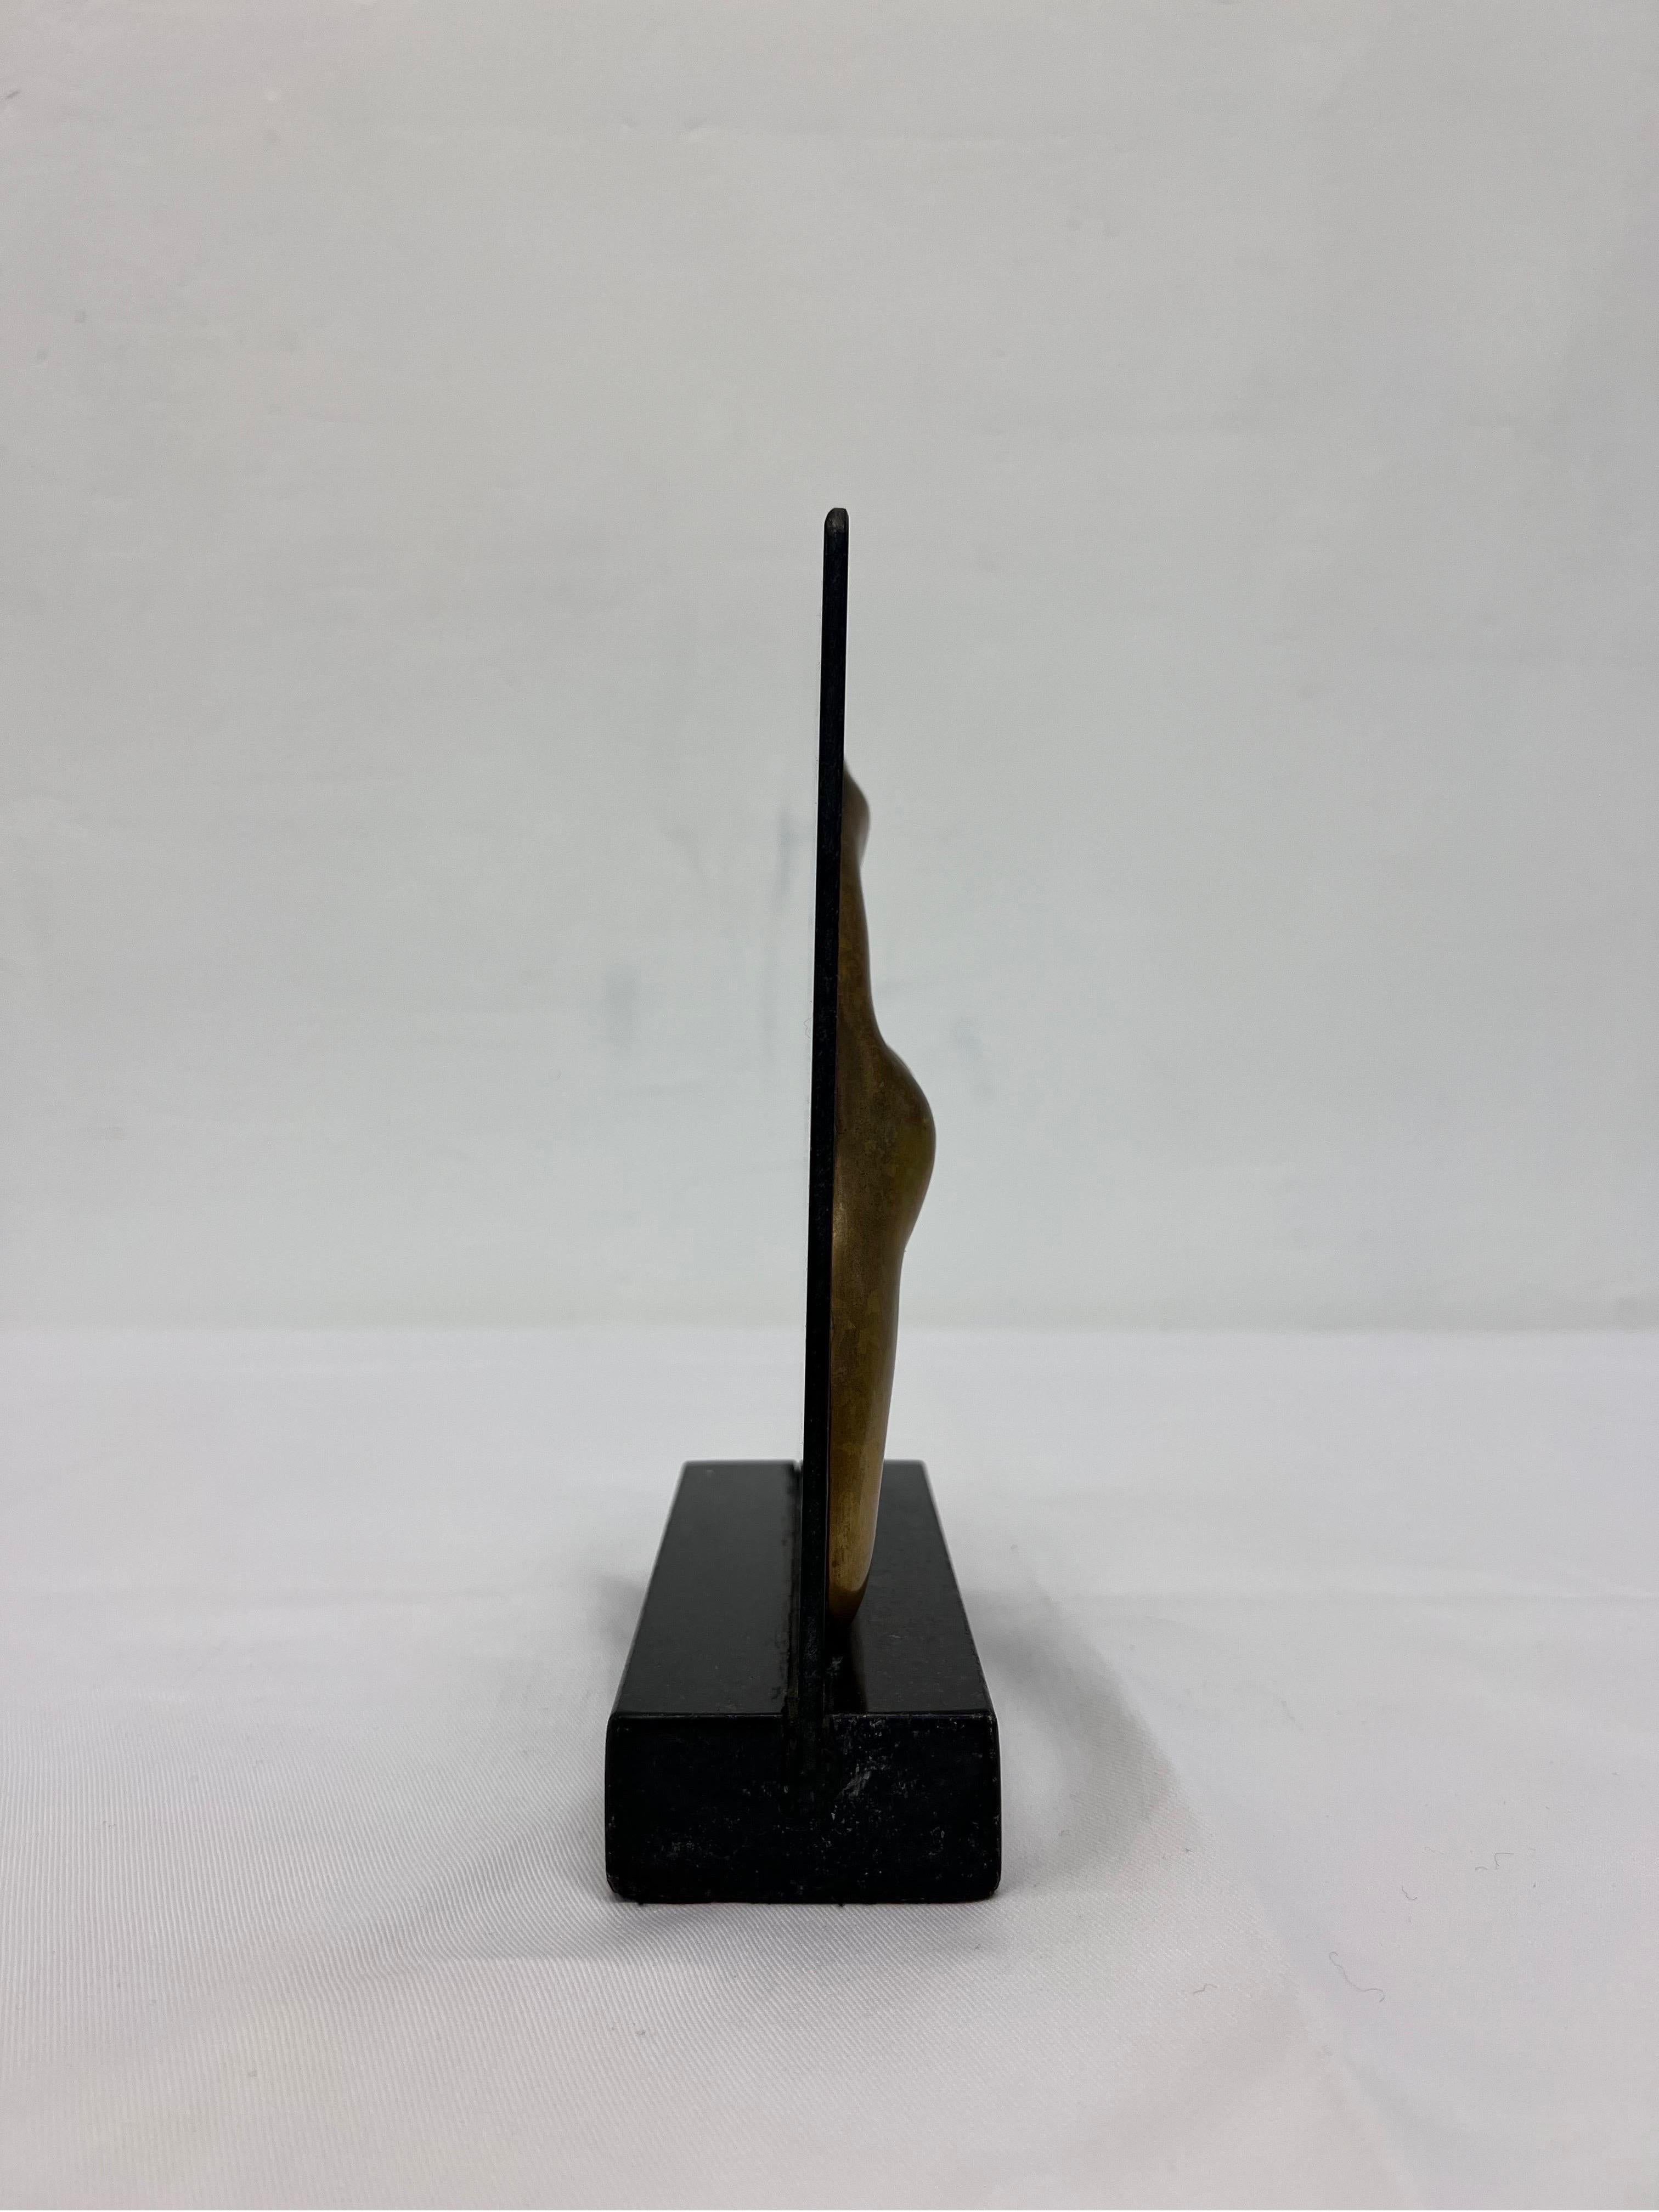 20th Century Brazilian Mid-Century Modern Bronze Sculpture on Glass and Granite Base, 1960s For Sale